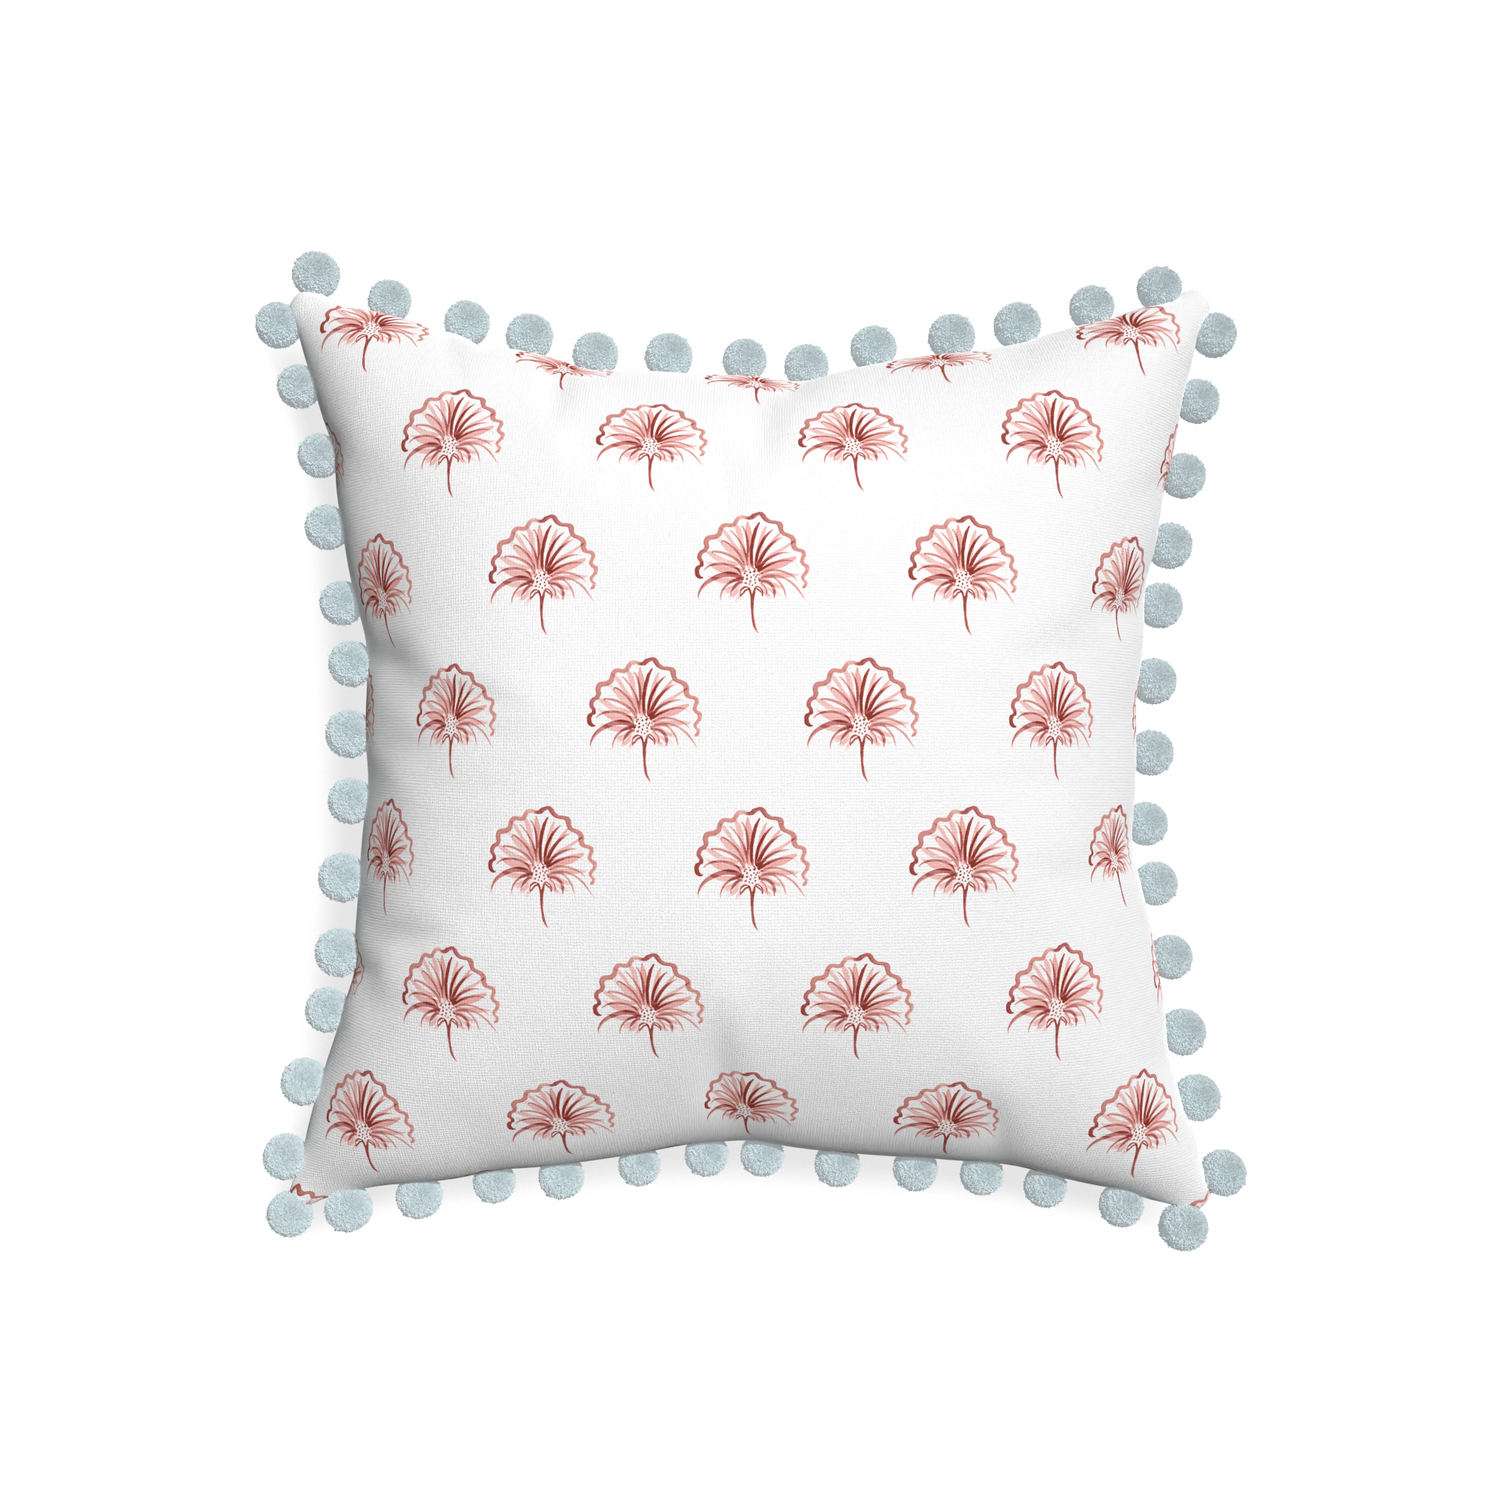 20-square penelope rose custom floral pinkpillow with powder pom pom on white background